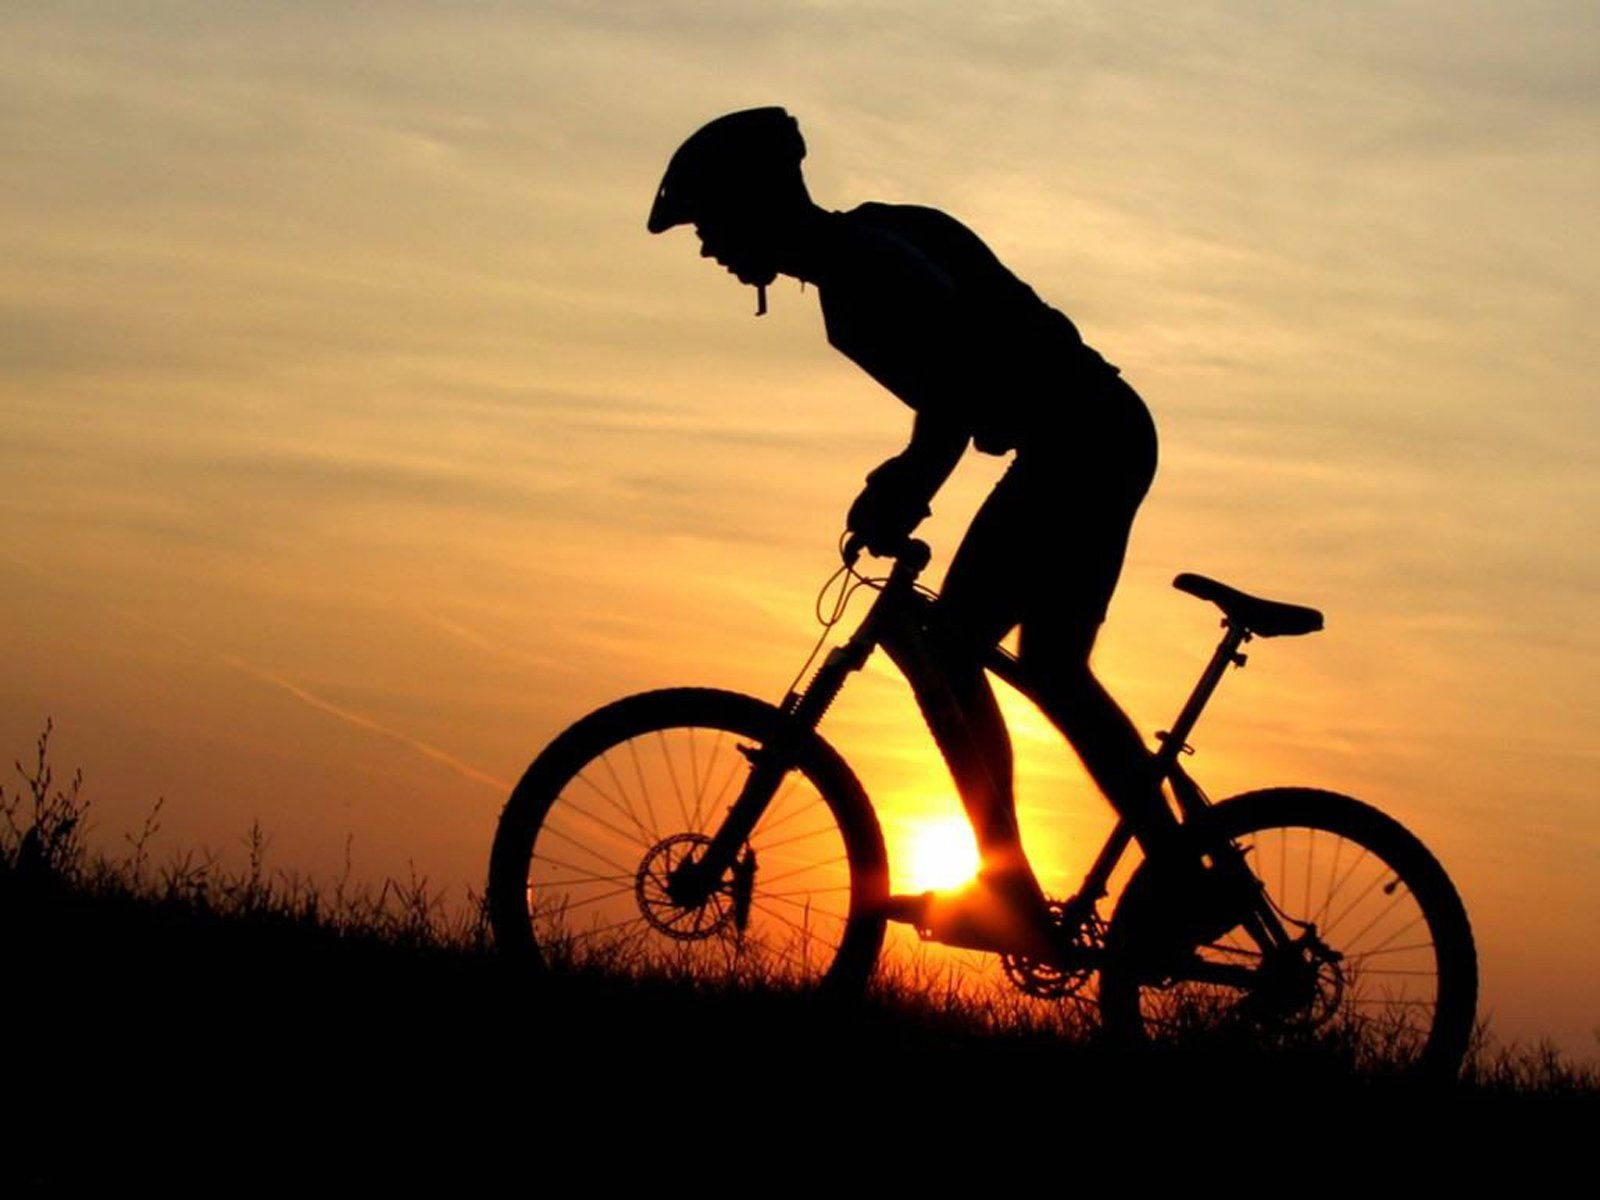 Cyclist On Bike Silhouette At Sunset Background